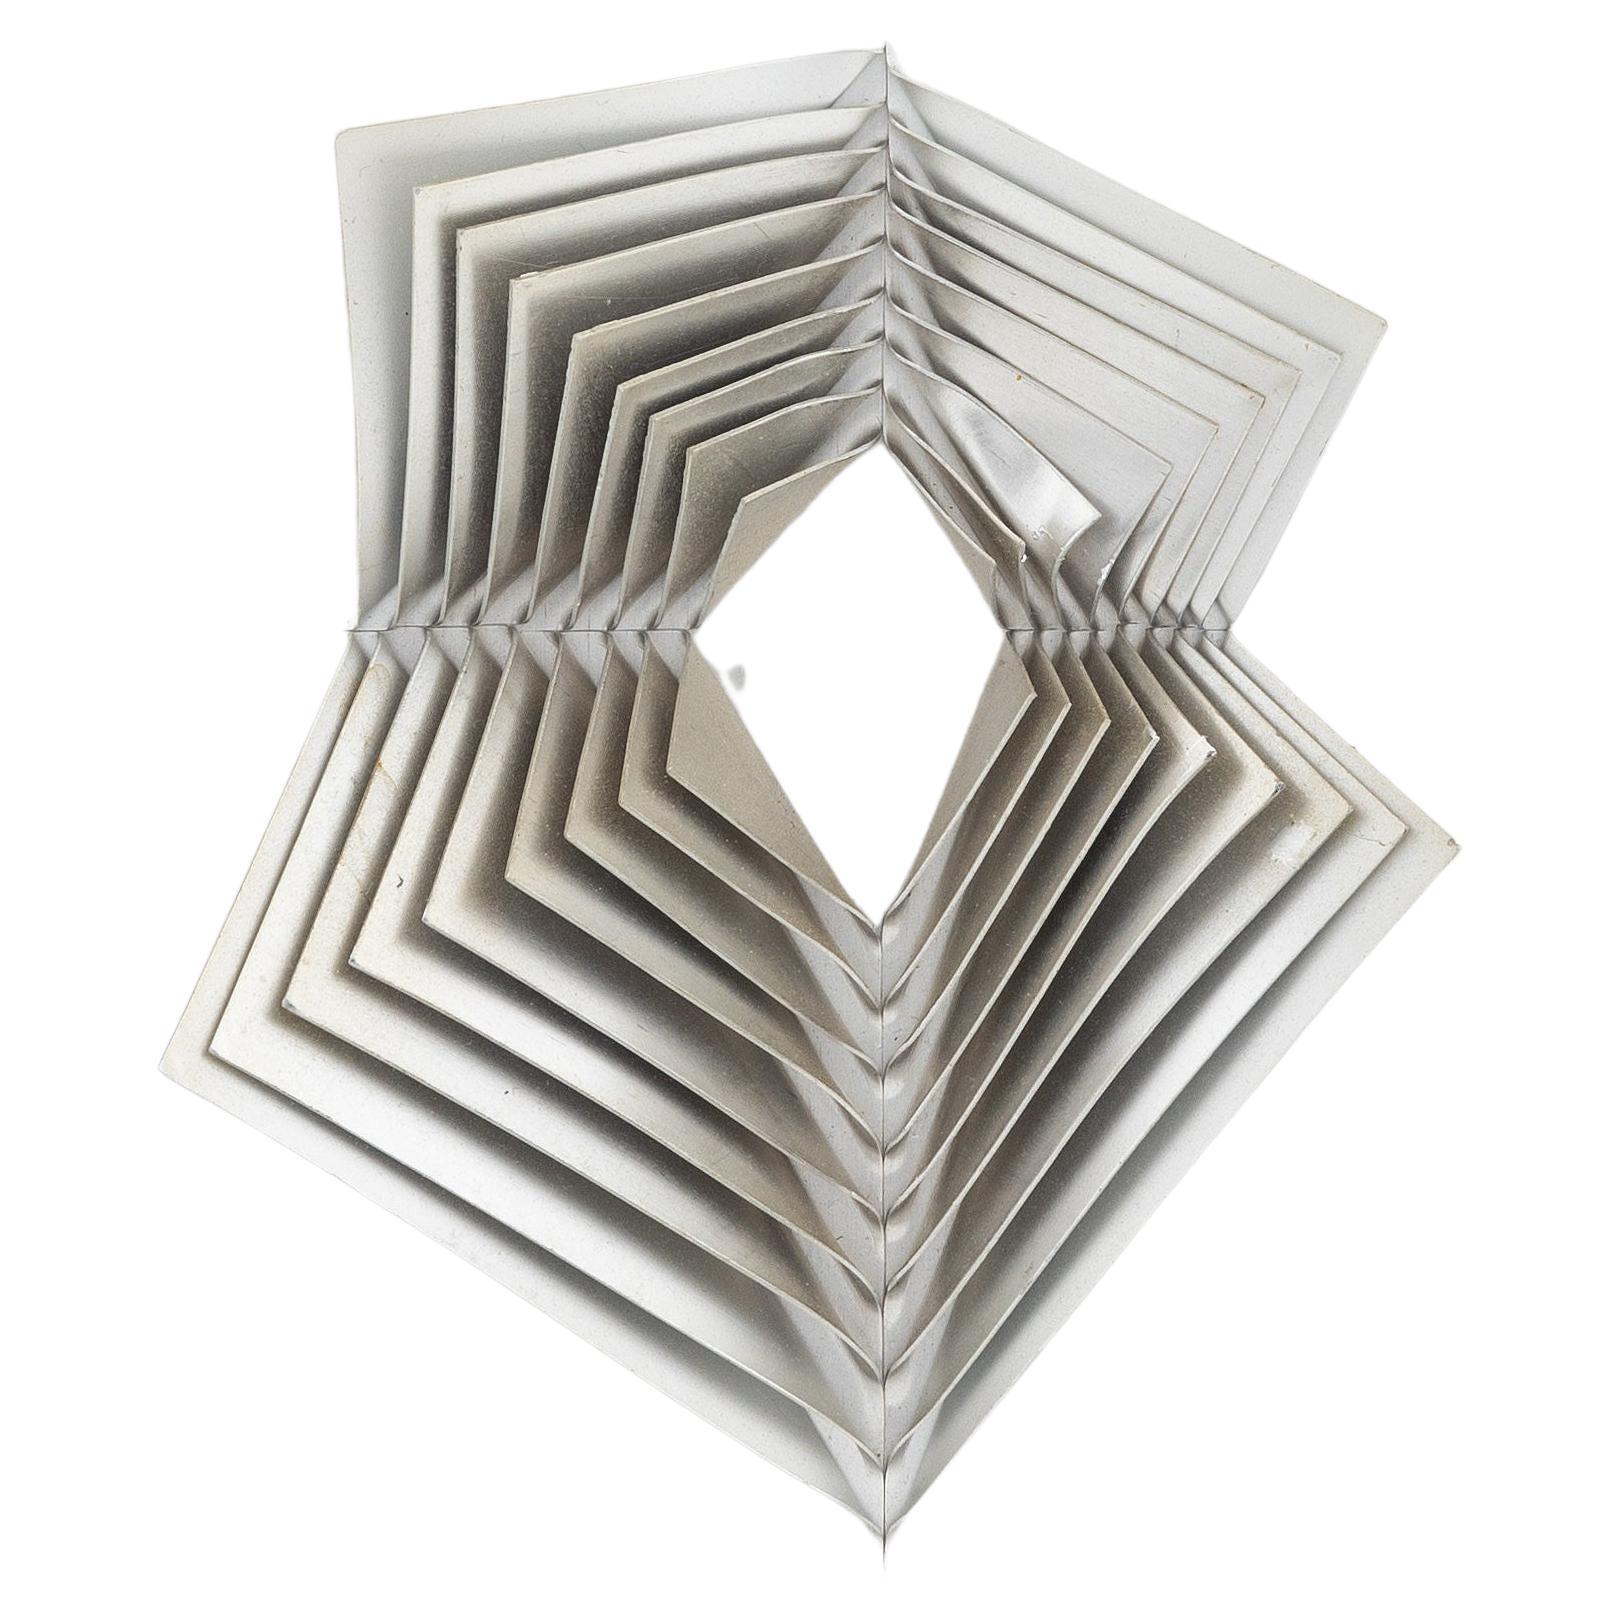 Aluminum wall sculpture by Swedish artist Arne Jones dating from the 1970s. Composed of 9 aluminum plates stacked and attached to each other by four rivets. This multiple is supposed to have been made at about 4000 copies. 3000 copies for the first